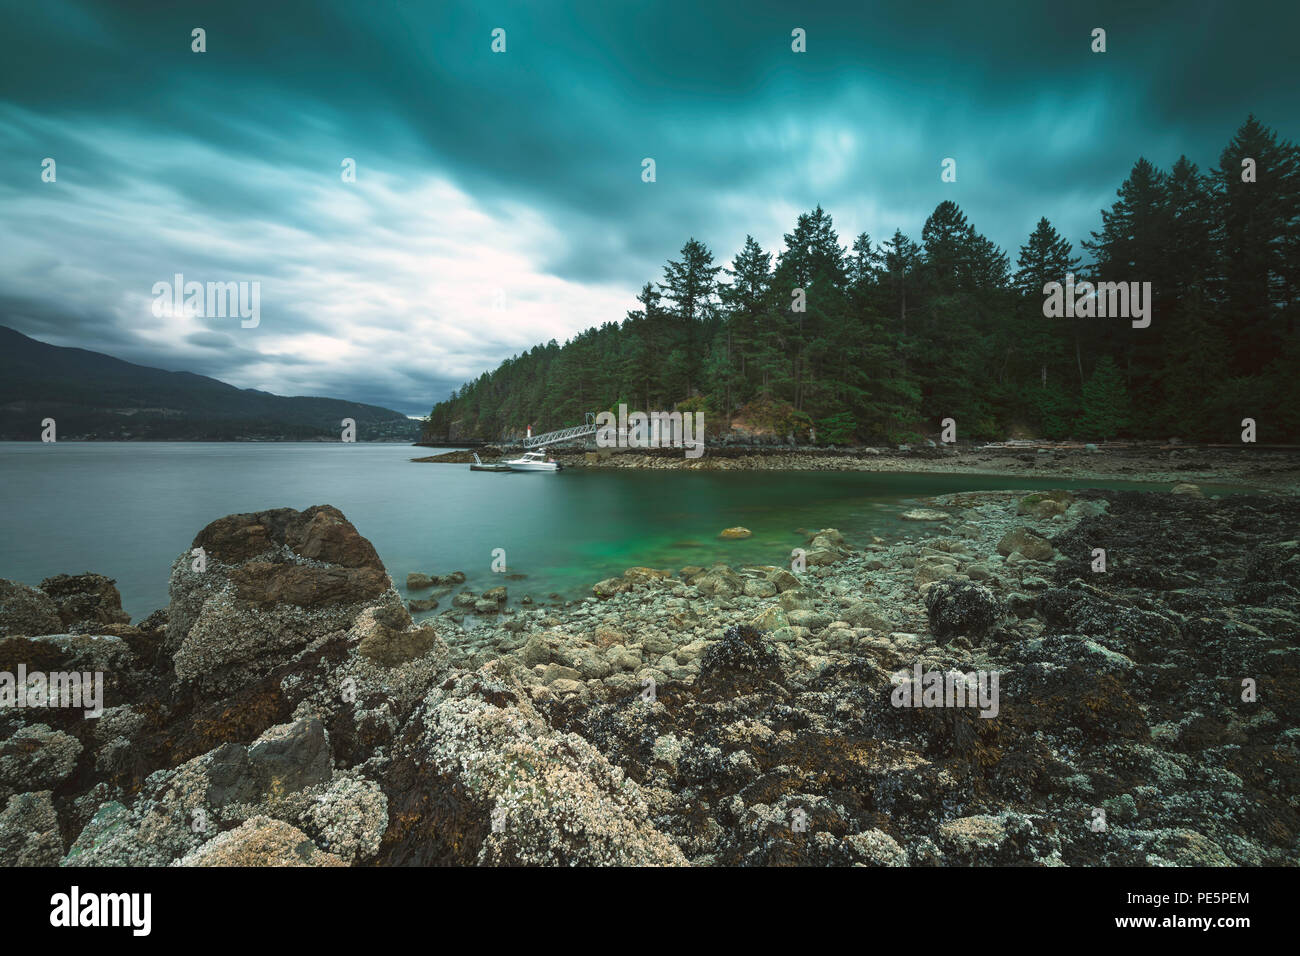 The beautiful scapes of Bowen Island BC Canada in the Pacific North West Landscapes. Stock Photo